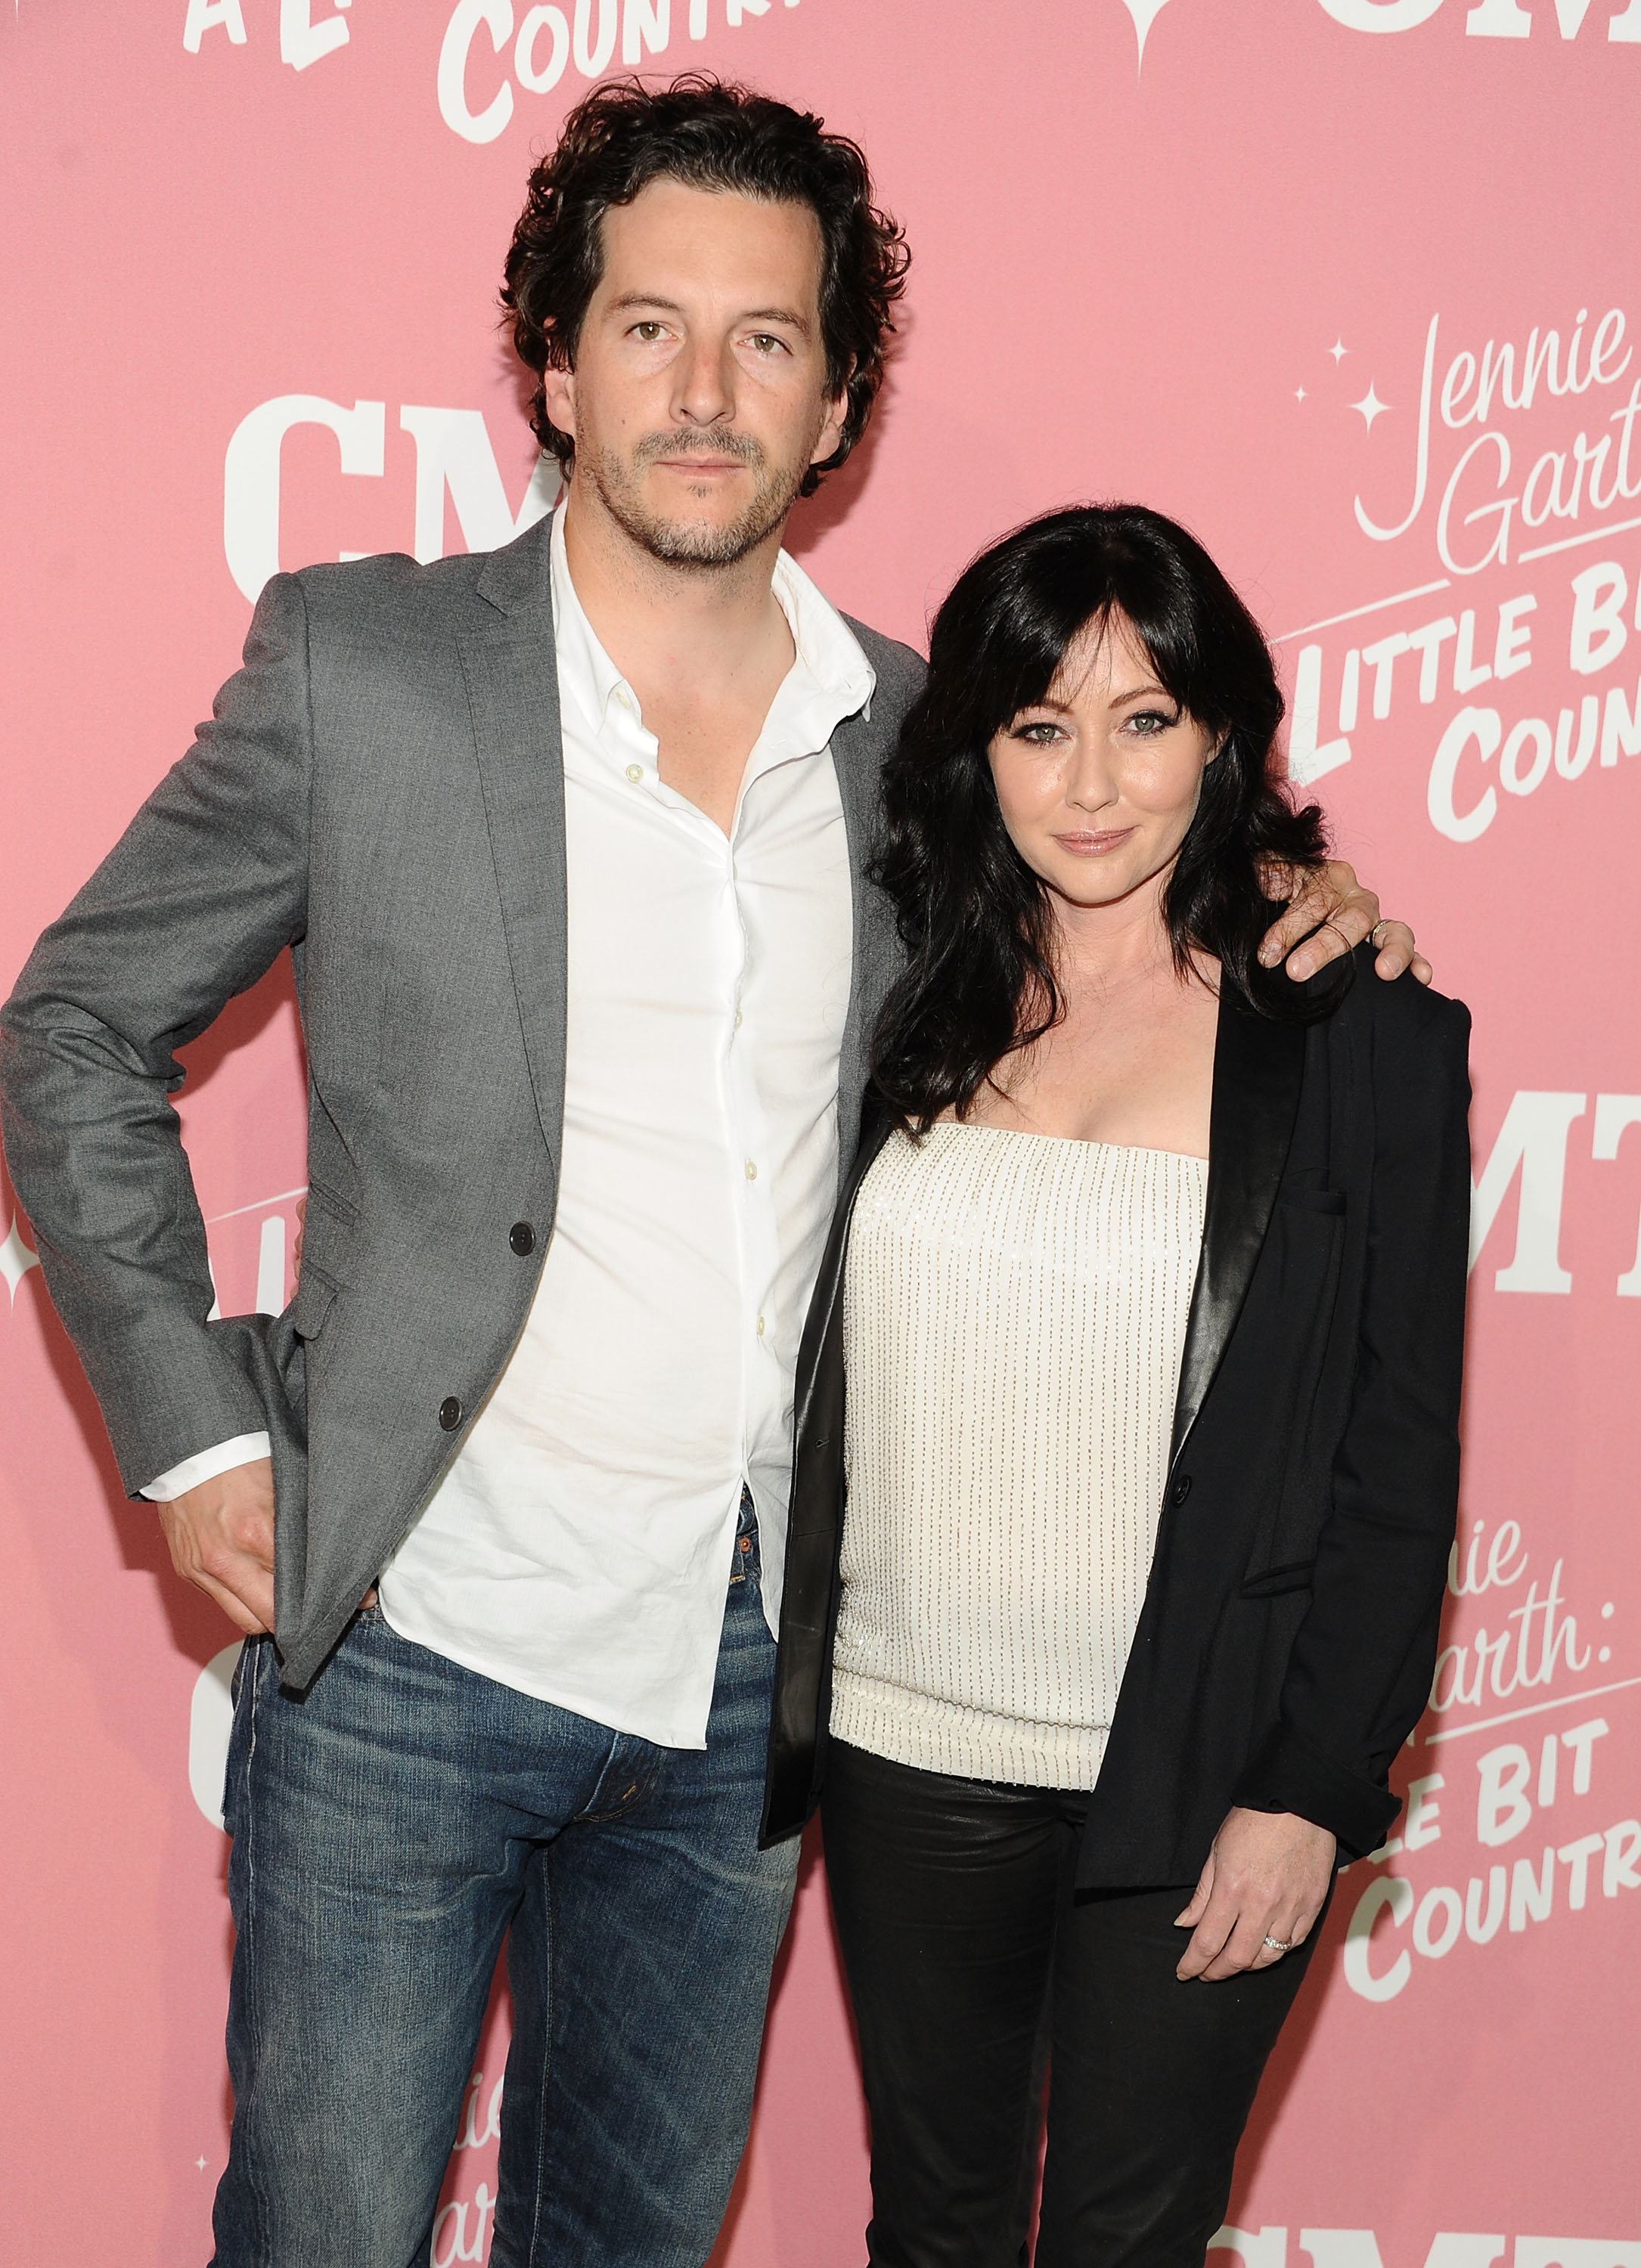 Kurt Iswarienko and Shannen Doherty at Jennie Garth's 40th birthday celebration and premiere party for "Jennie Garth: A Little Bit Country" at The London Hotel in West Hollywood, California on April 19, 2012. | Source: Getty Images